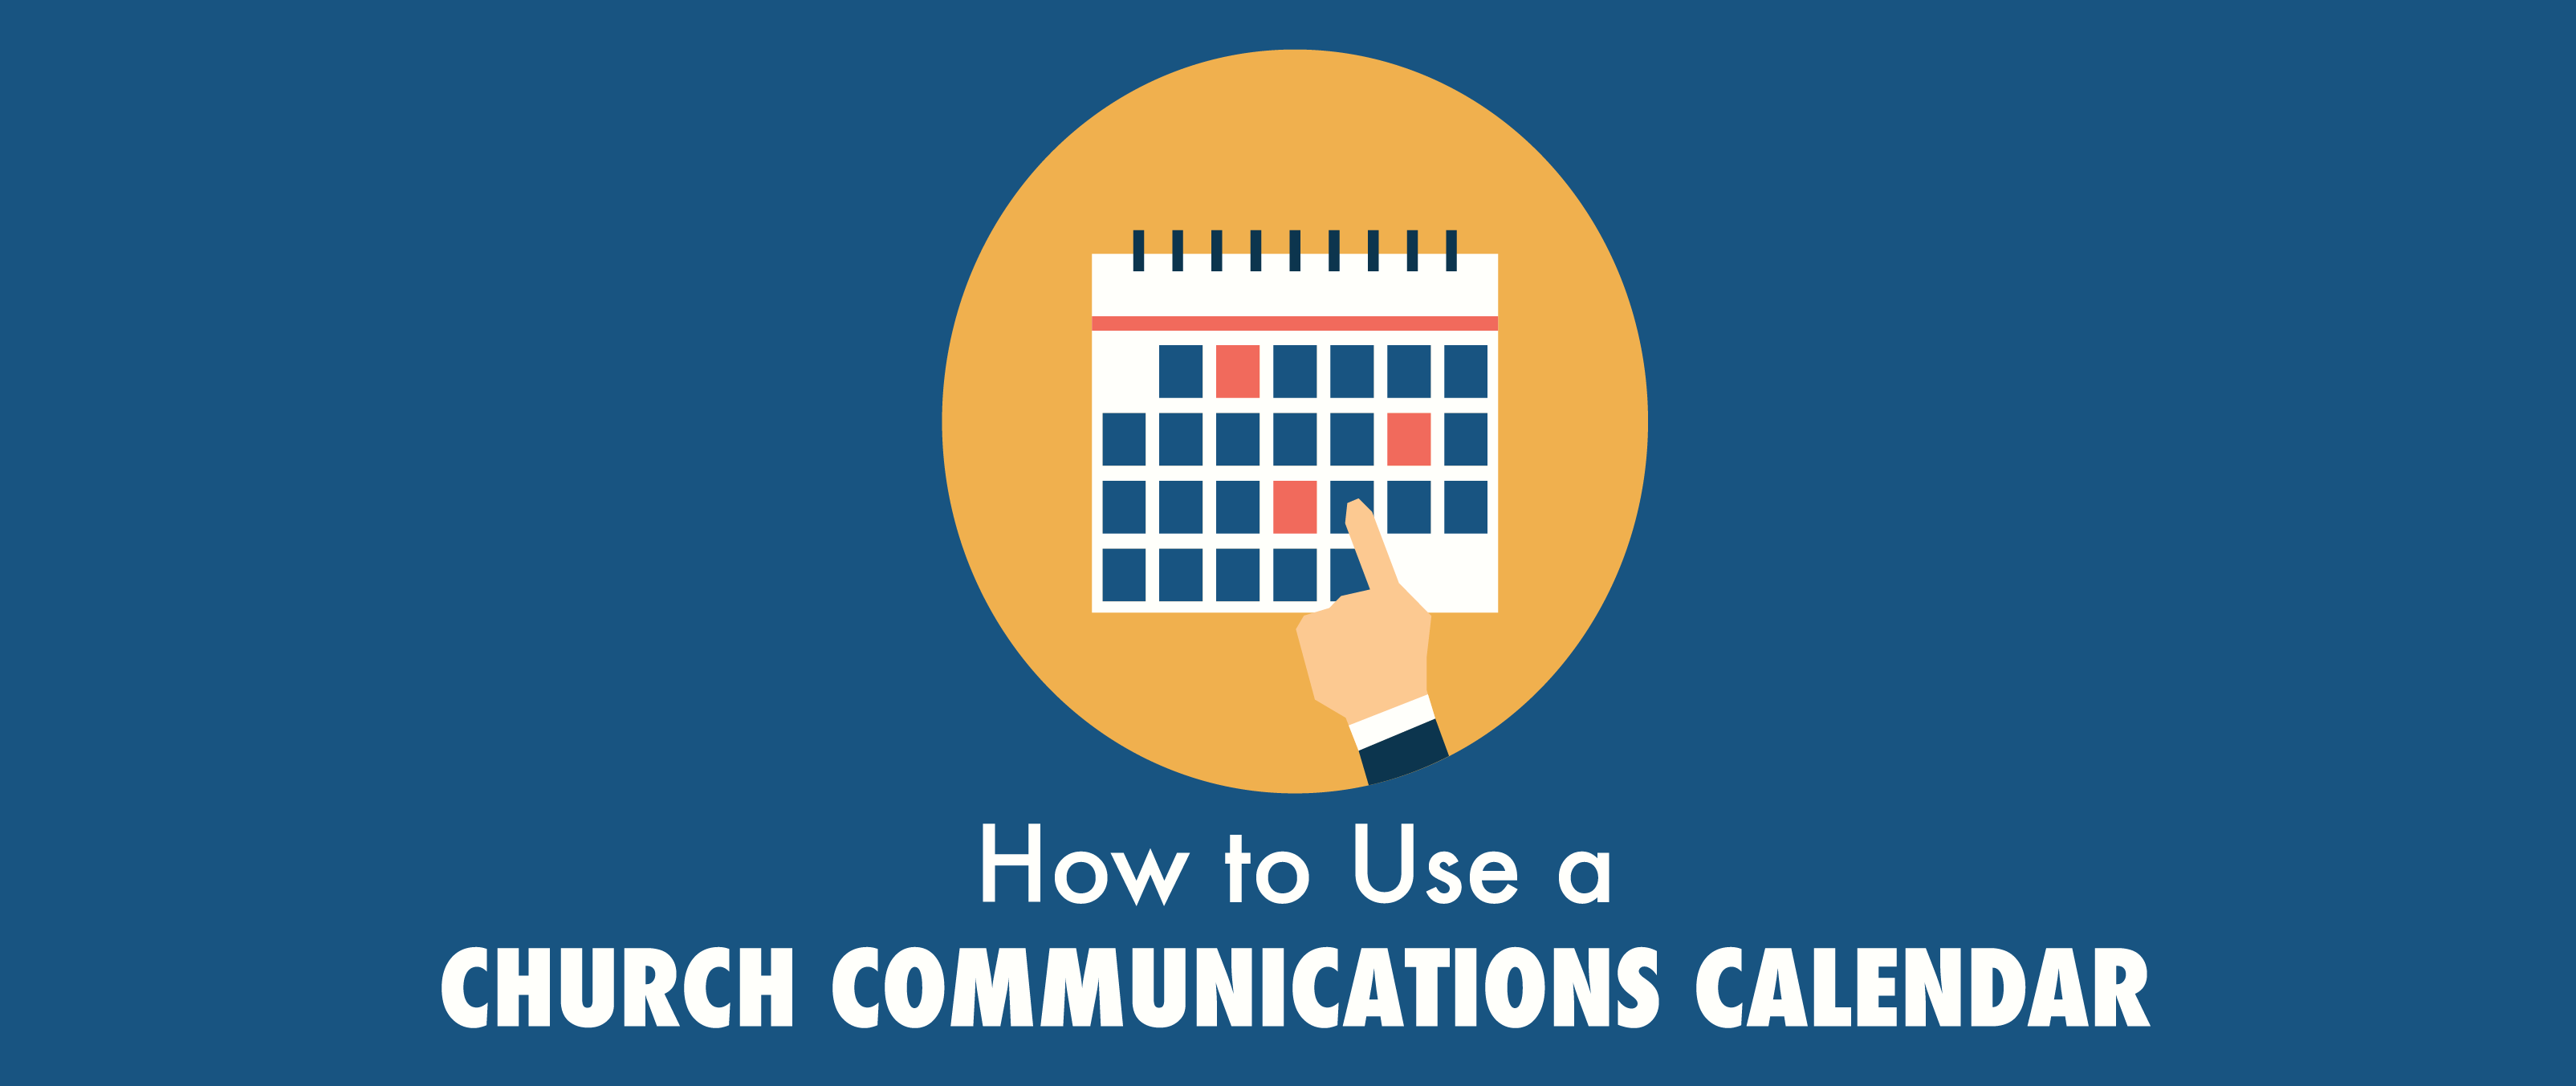 How to Use a Church Communications Calendar